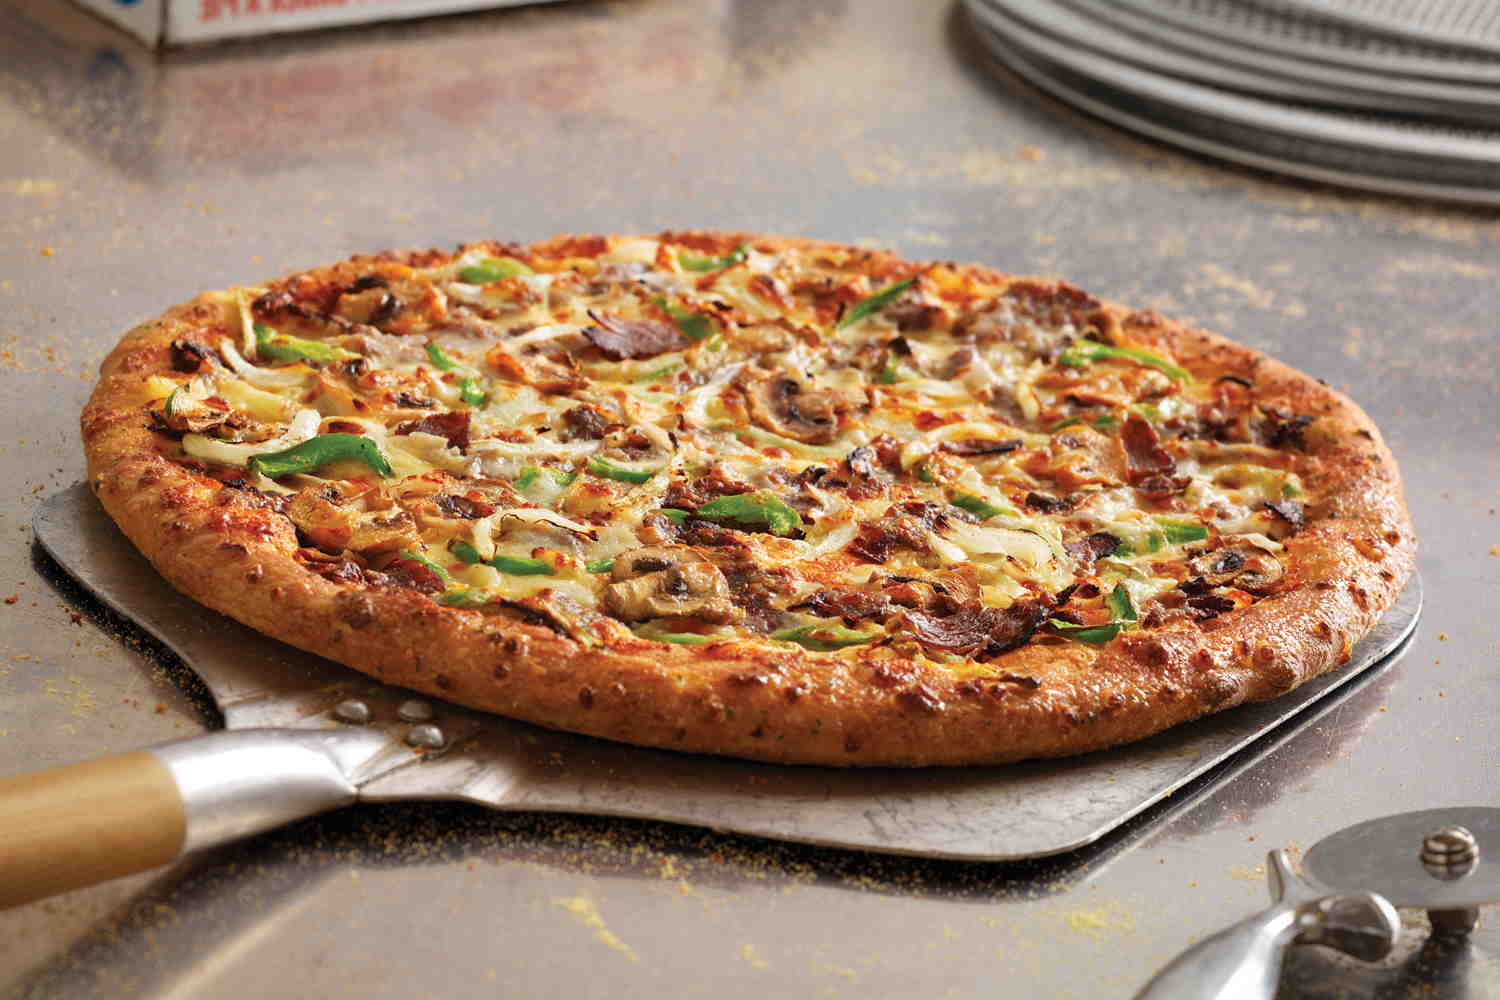 What Makes Domino's Philly Cheesesteak Pizza So Delicious?